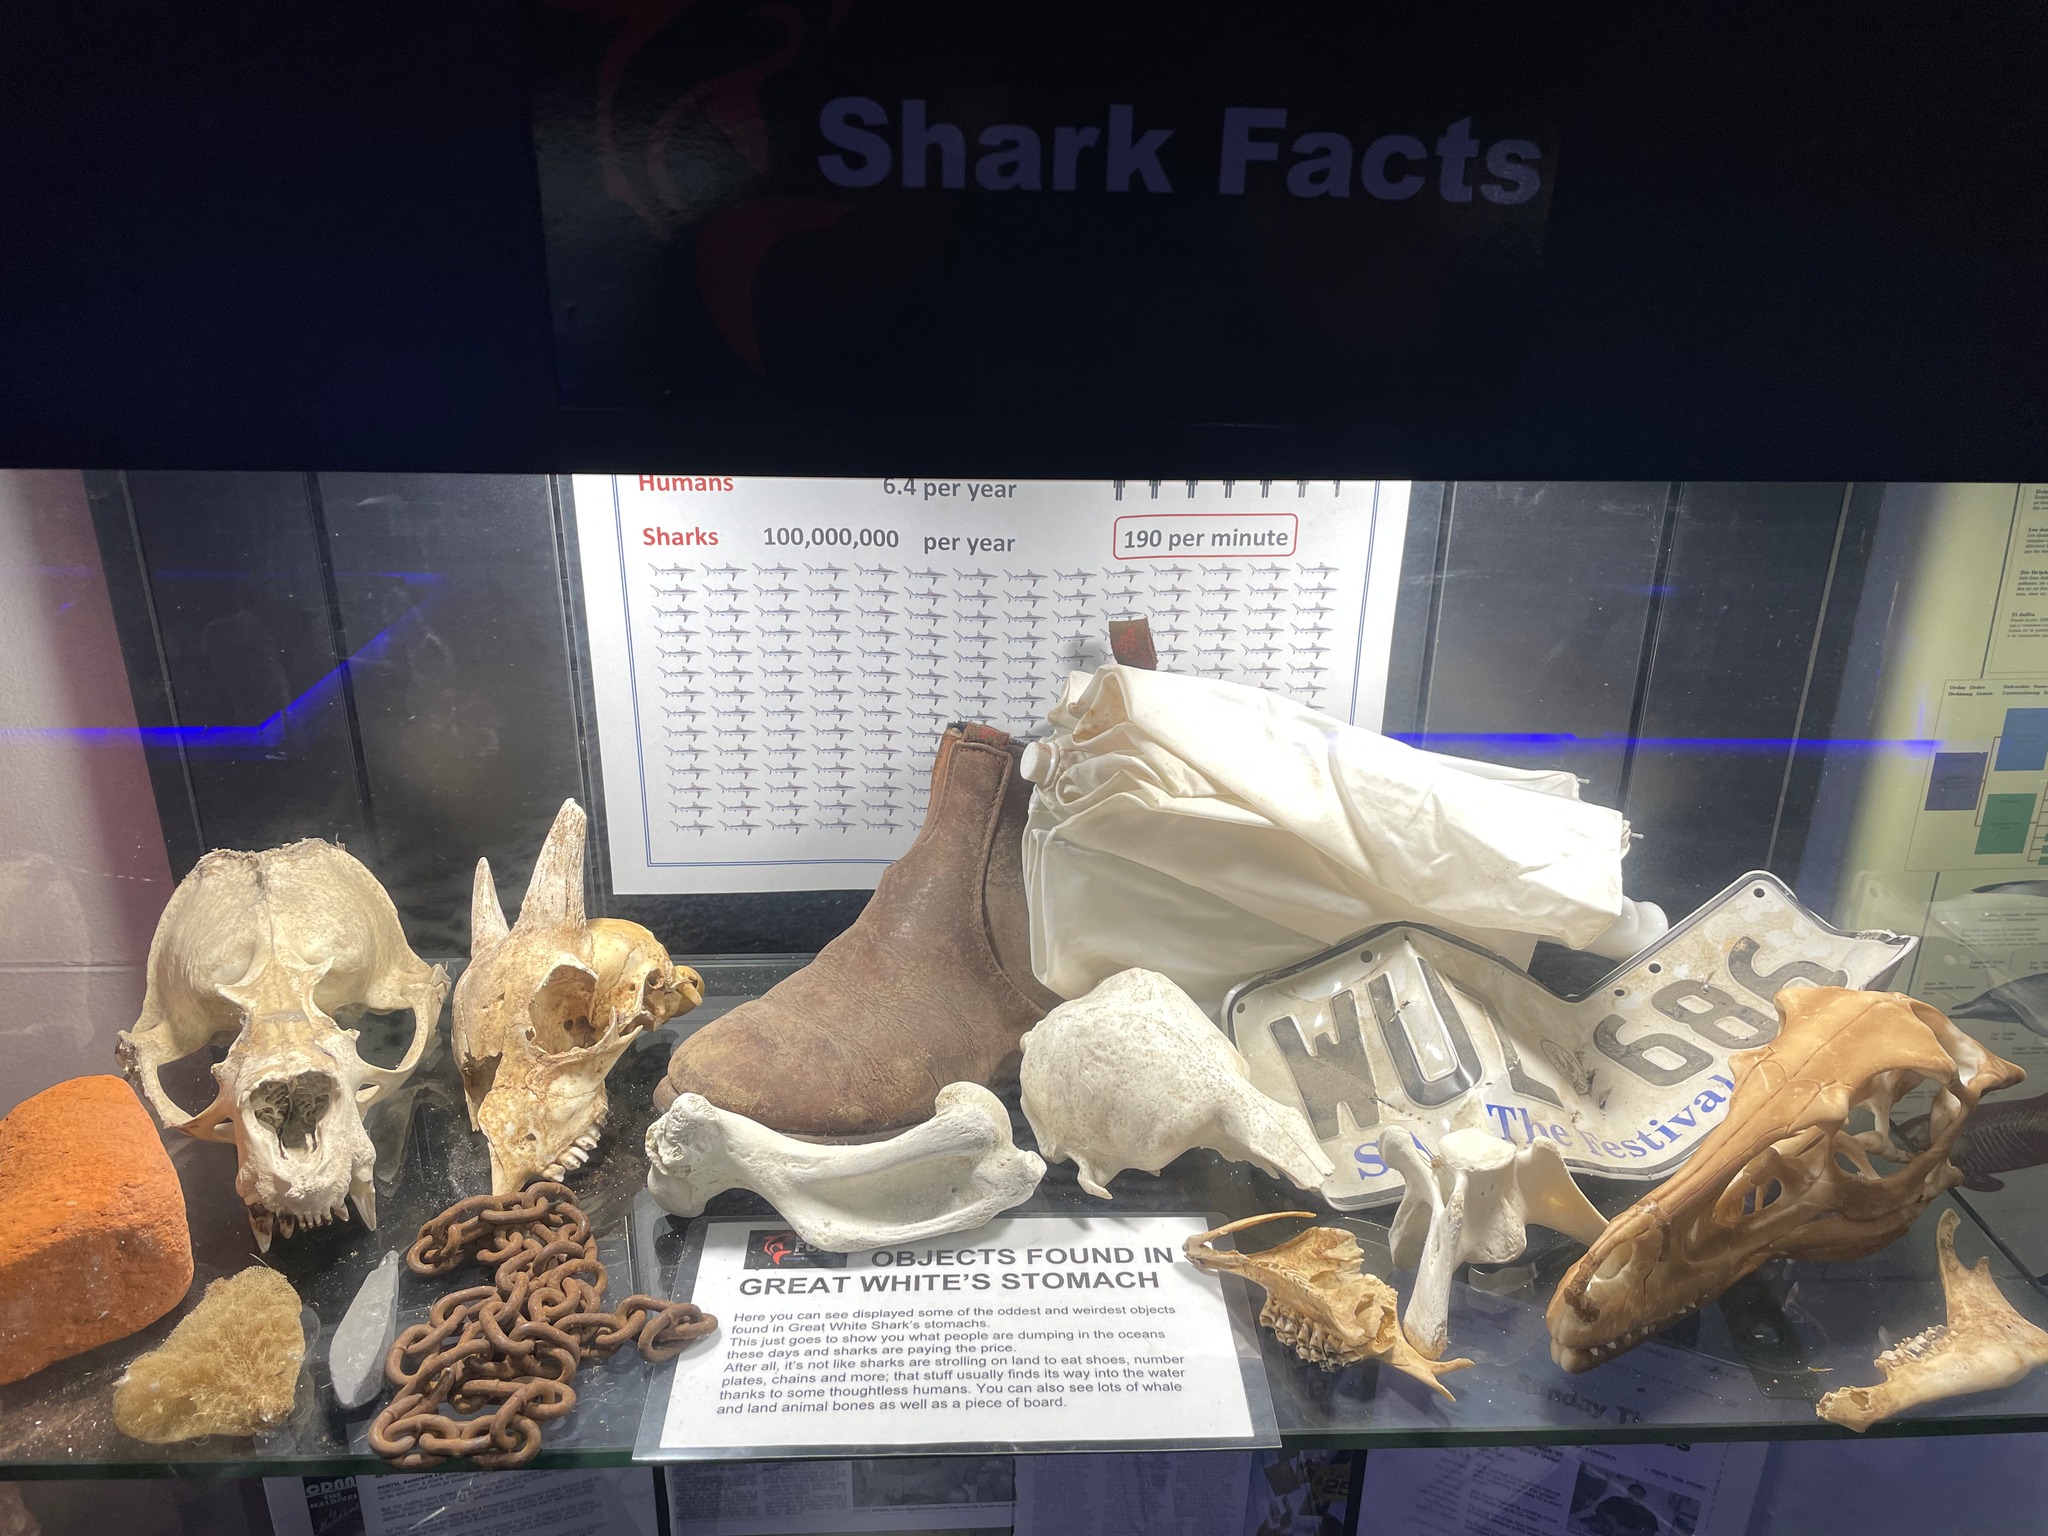 Shark stomach contents